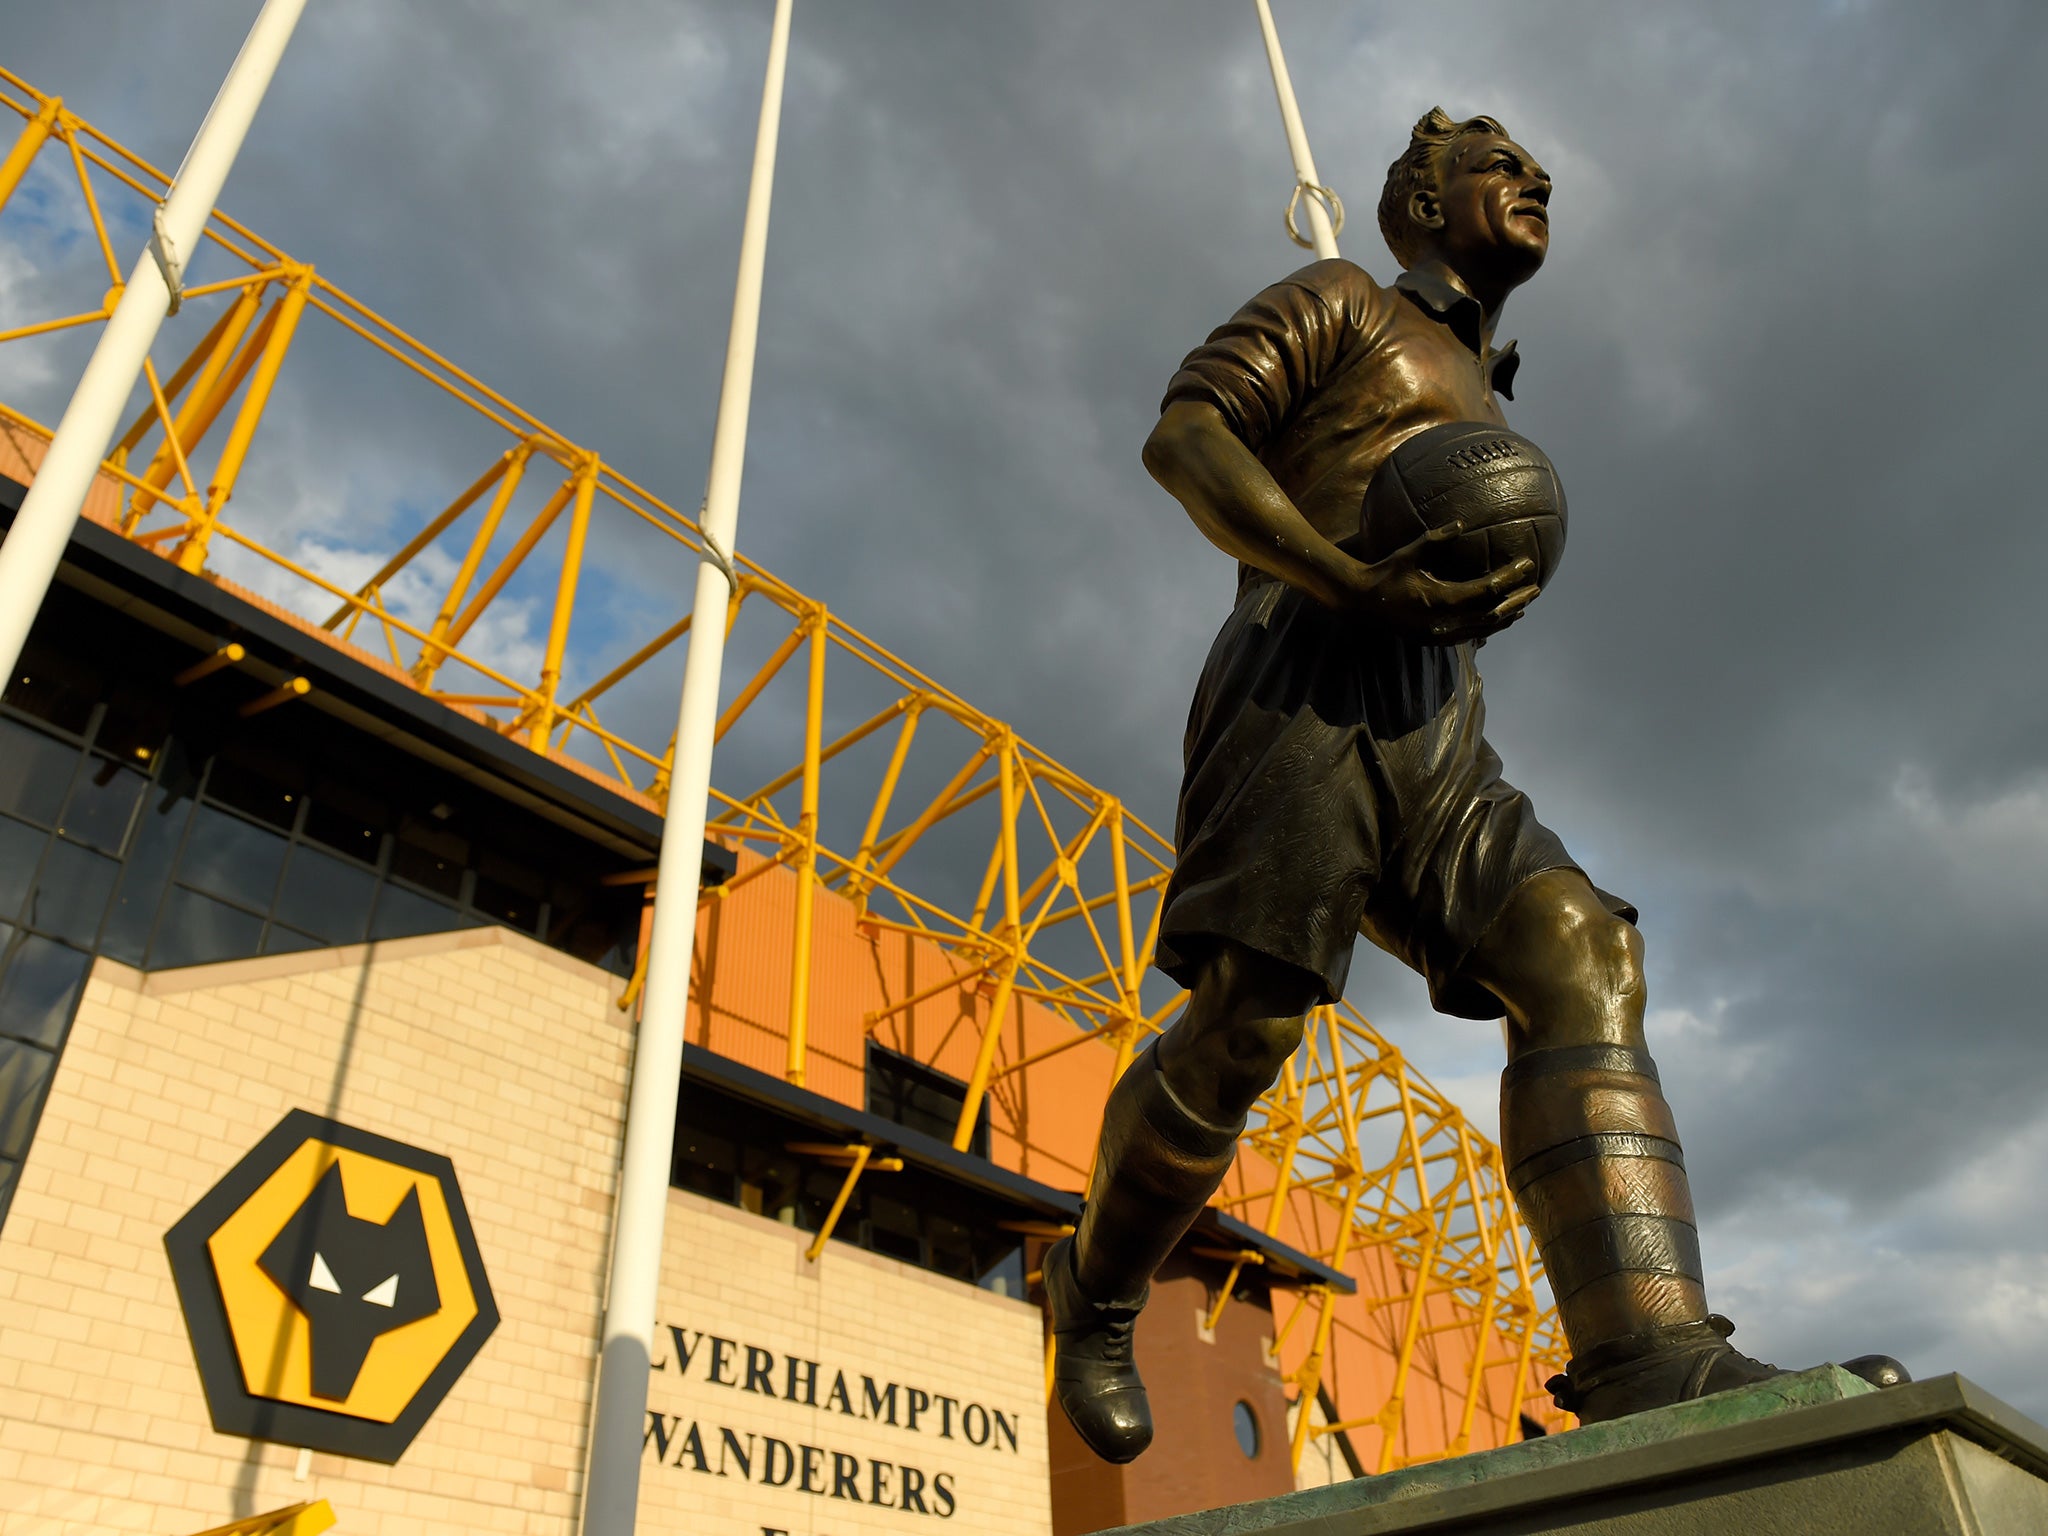 The link between Fosun and Mendes raised concerns that Wolves were in breach of the FA regulations